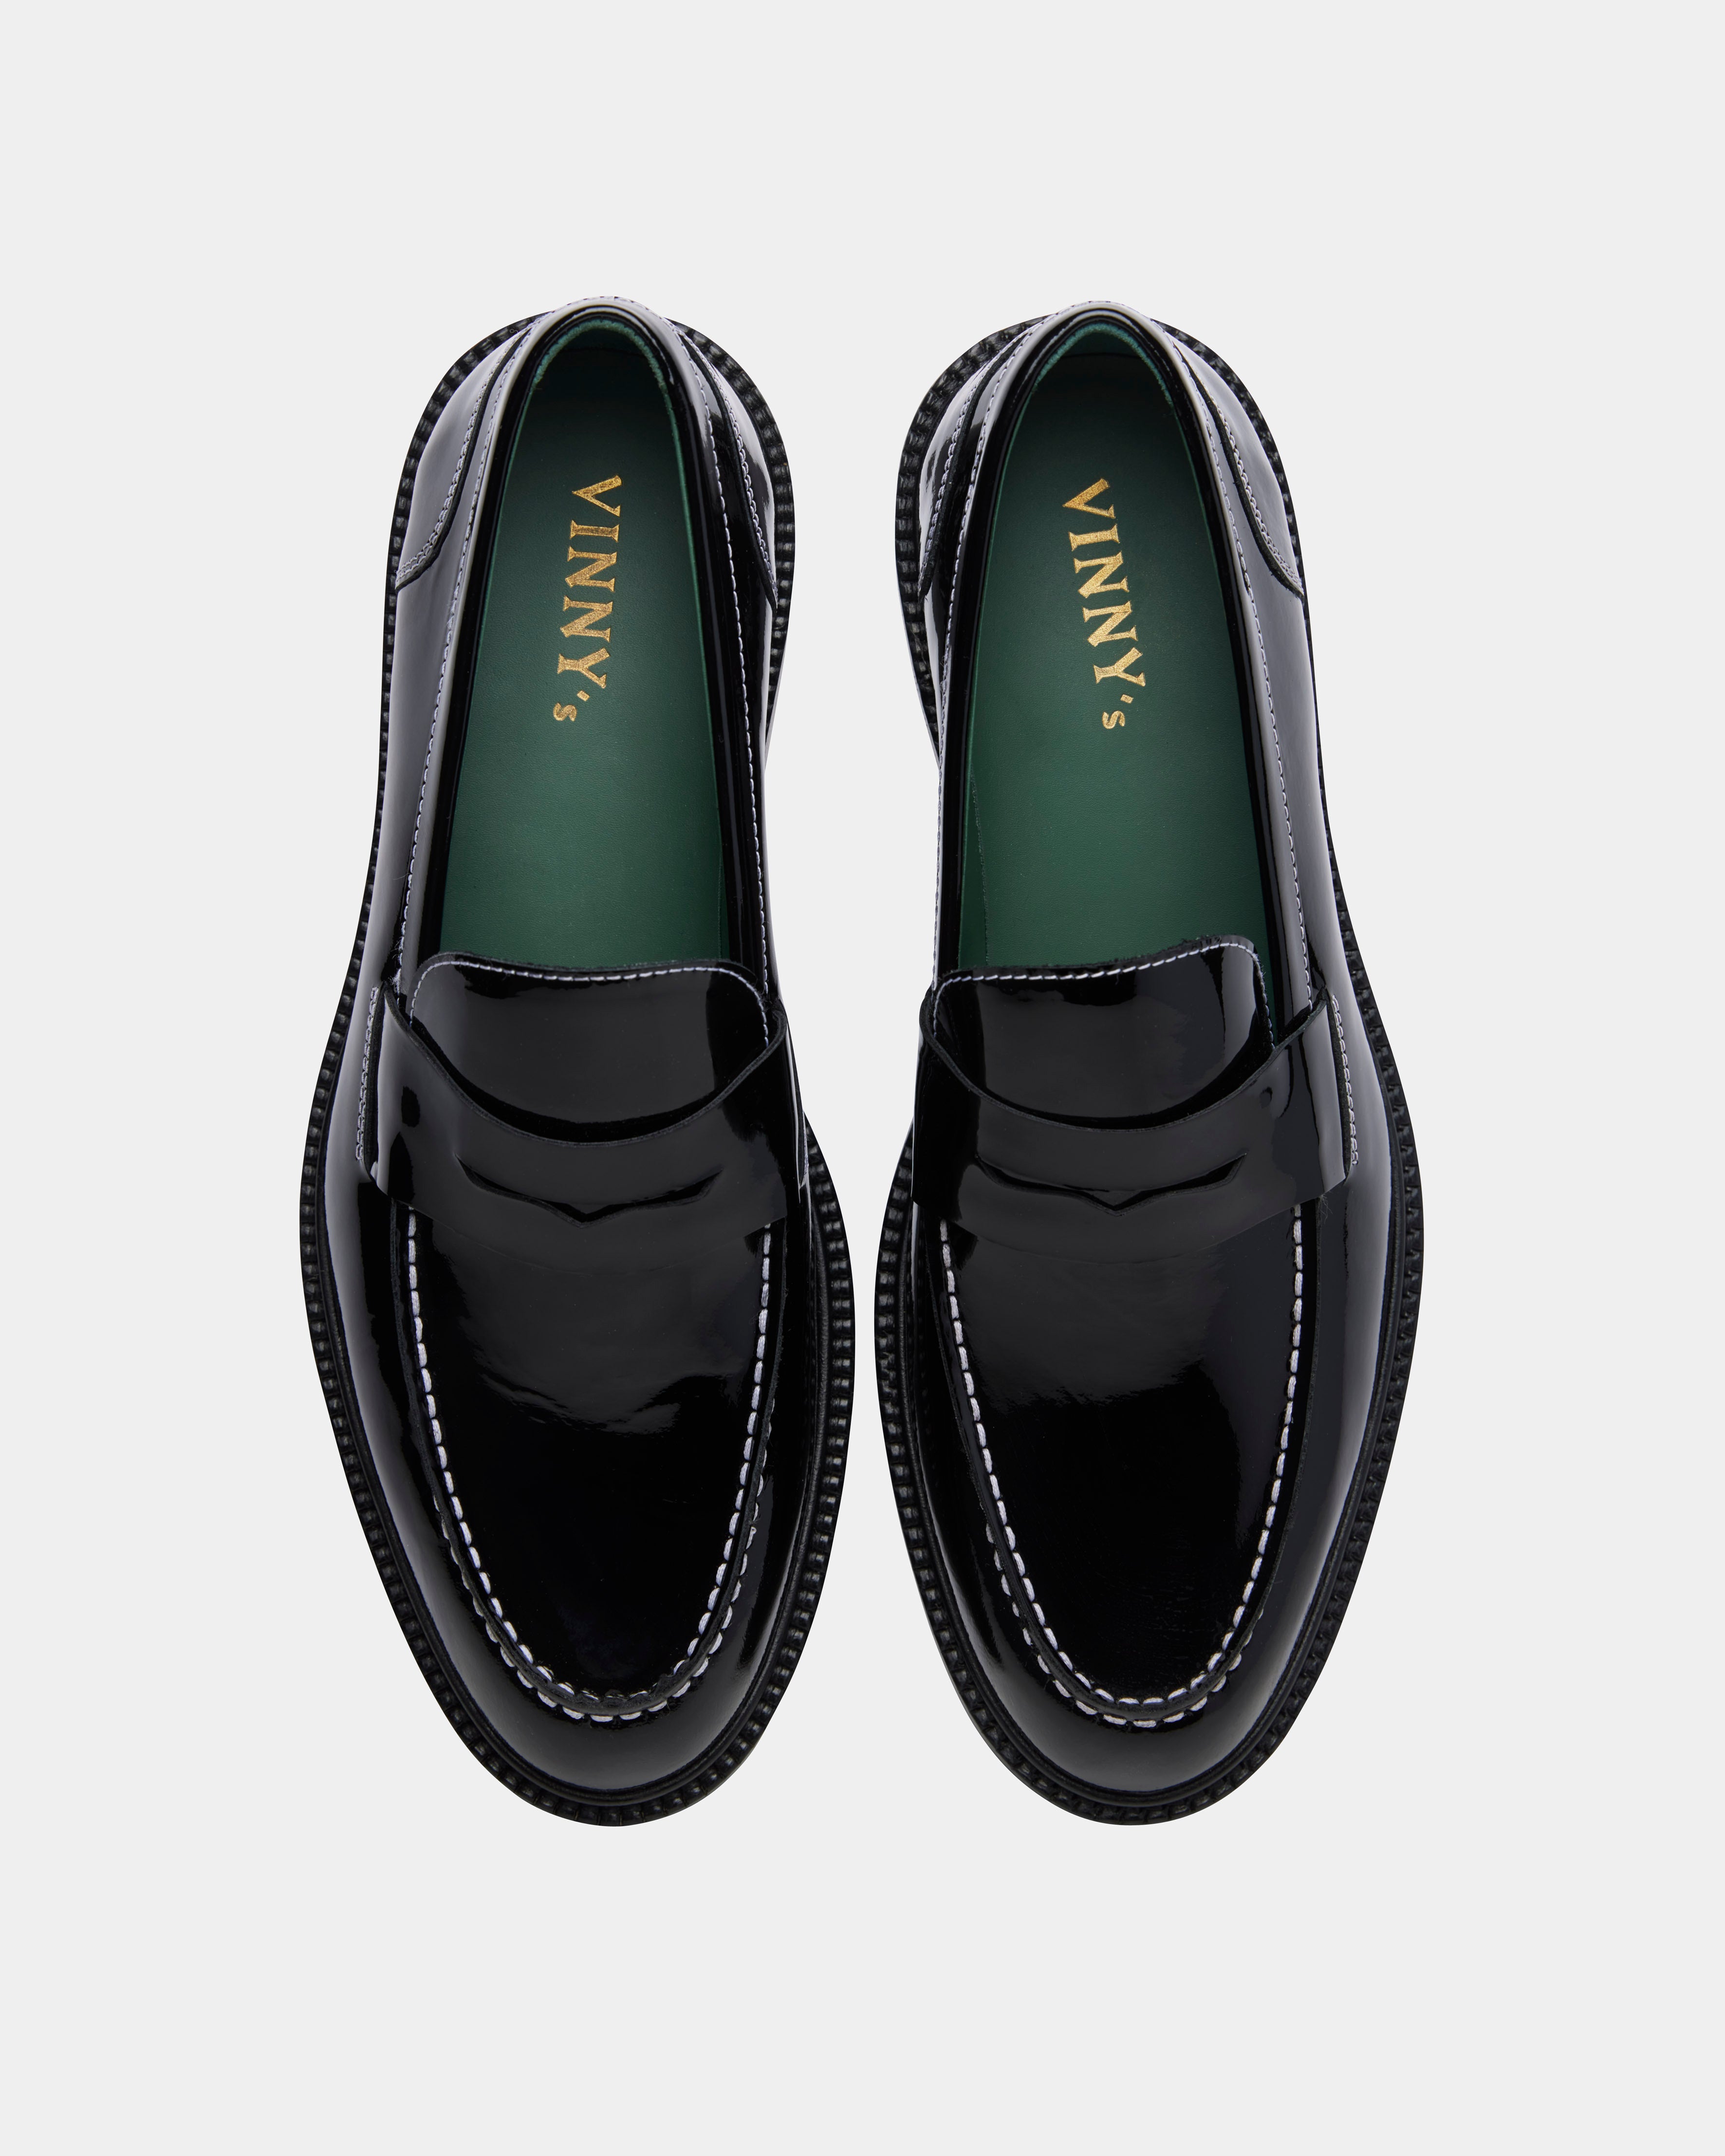 women's loafer in black patent leather